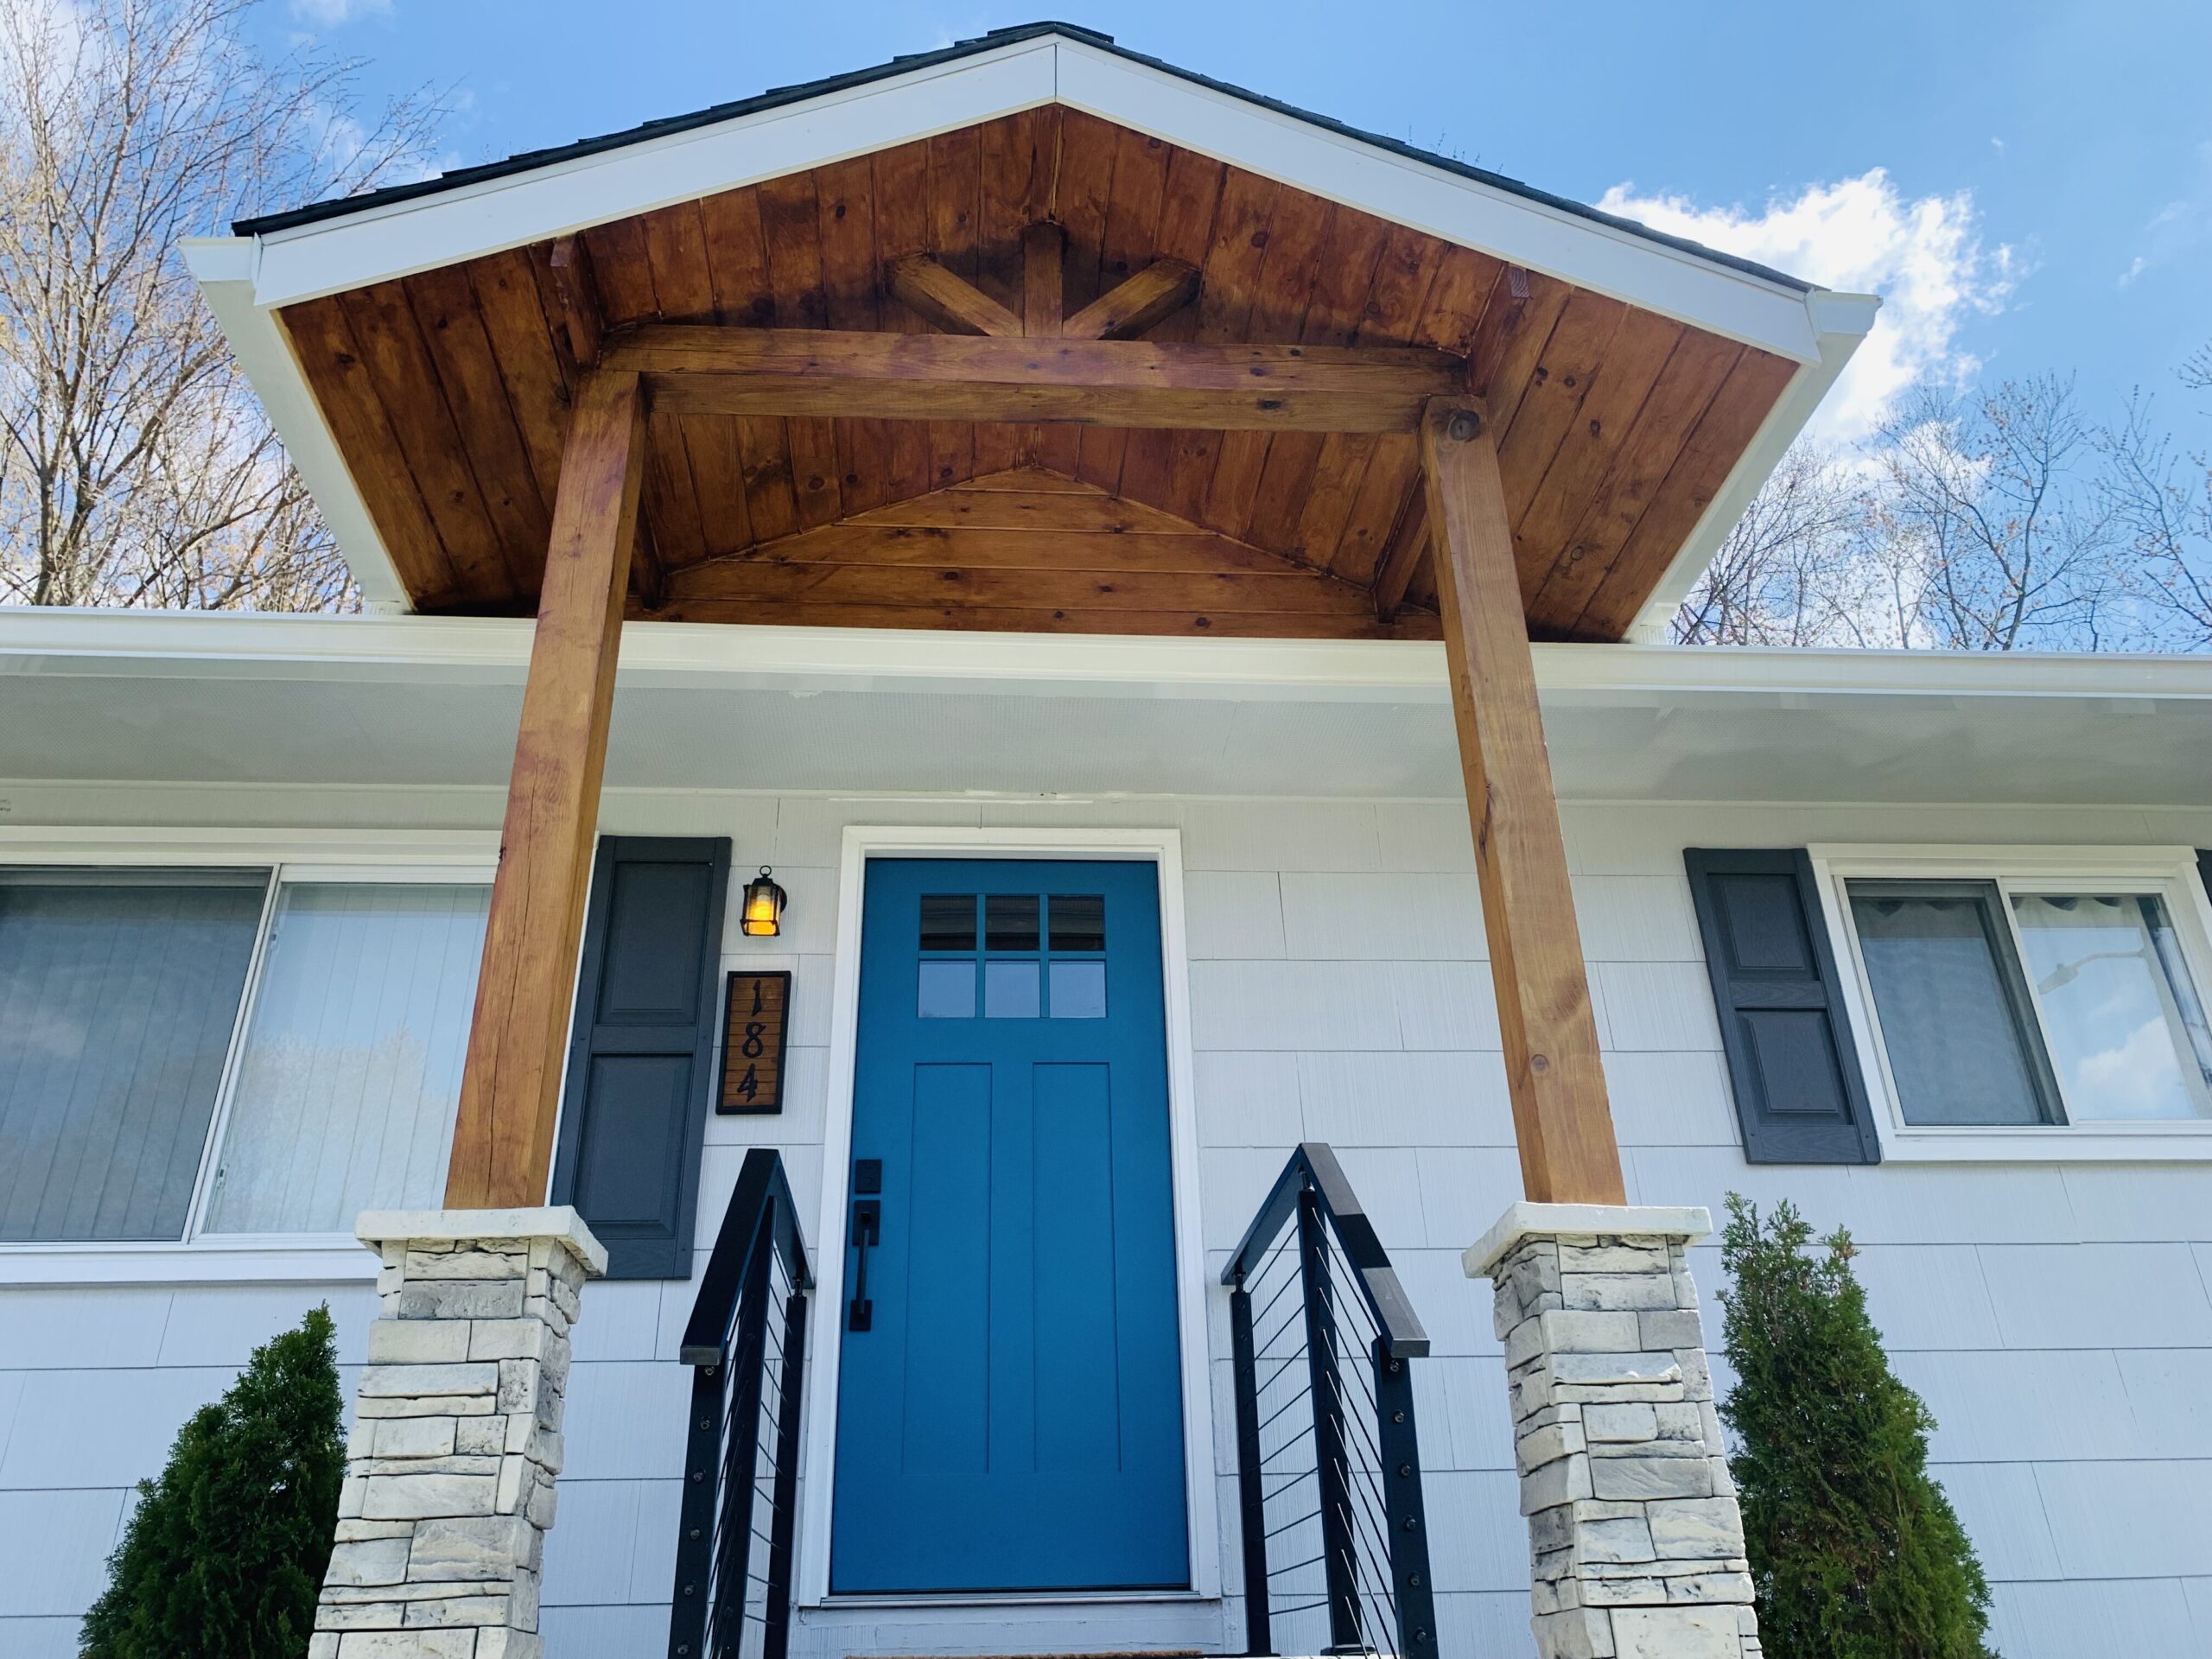 How to Build a Gable Porch Roof Overhang on an Existing House (Major DIY Curb Appeal Upgrade)